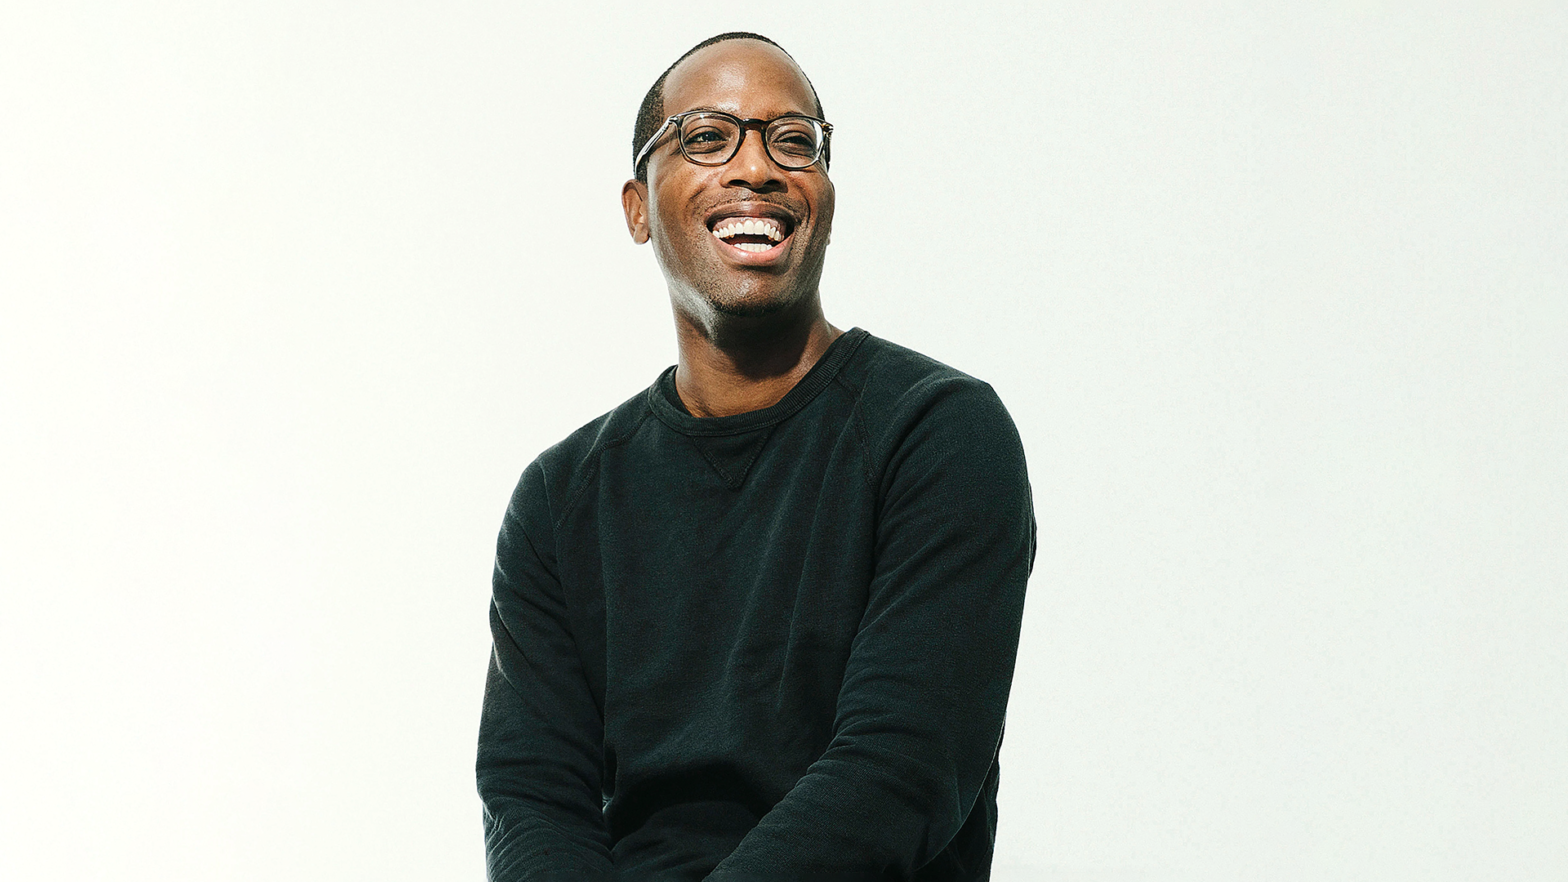 Tristan Walker Breaks Down The Global Influence Of Black Culture On The Latest Episode Of Black Tech Green Money